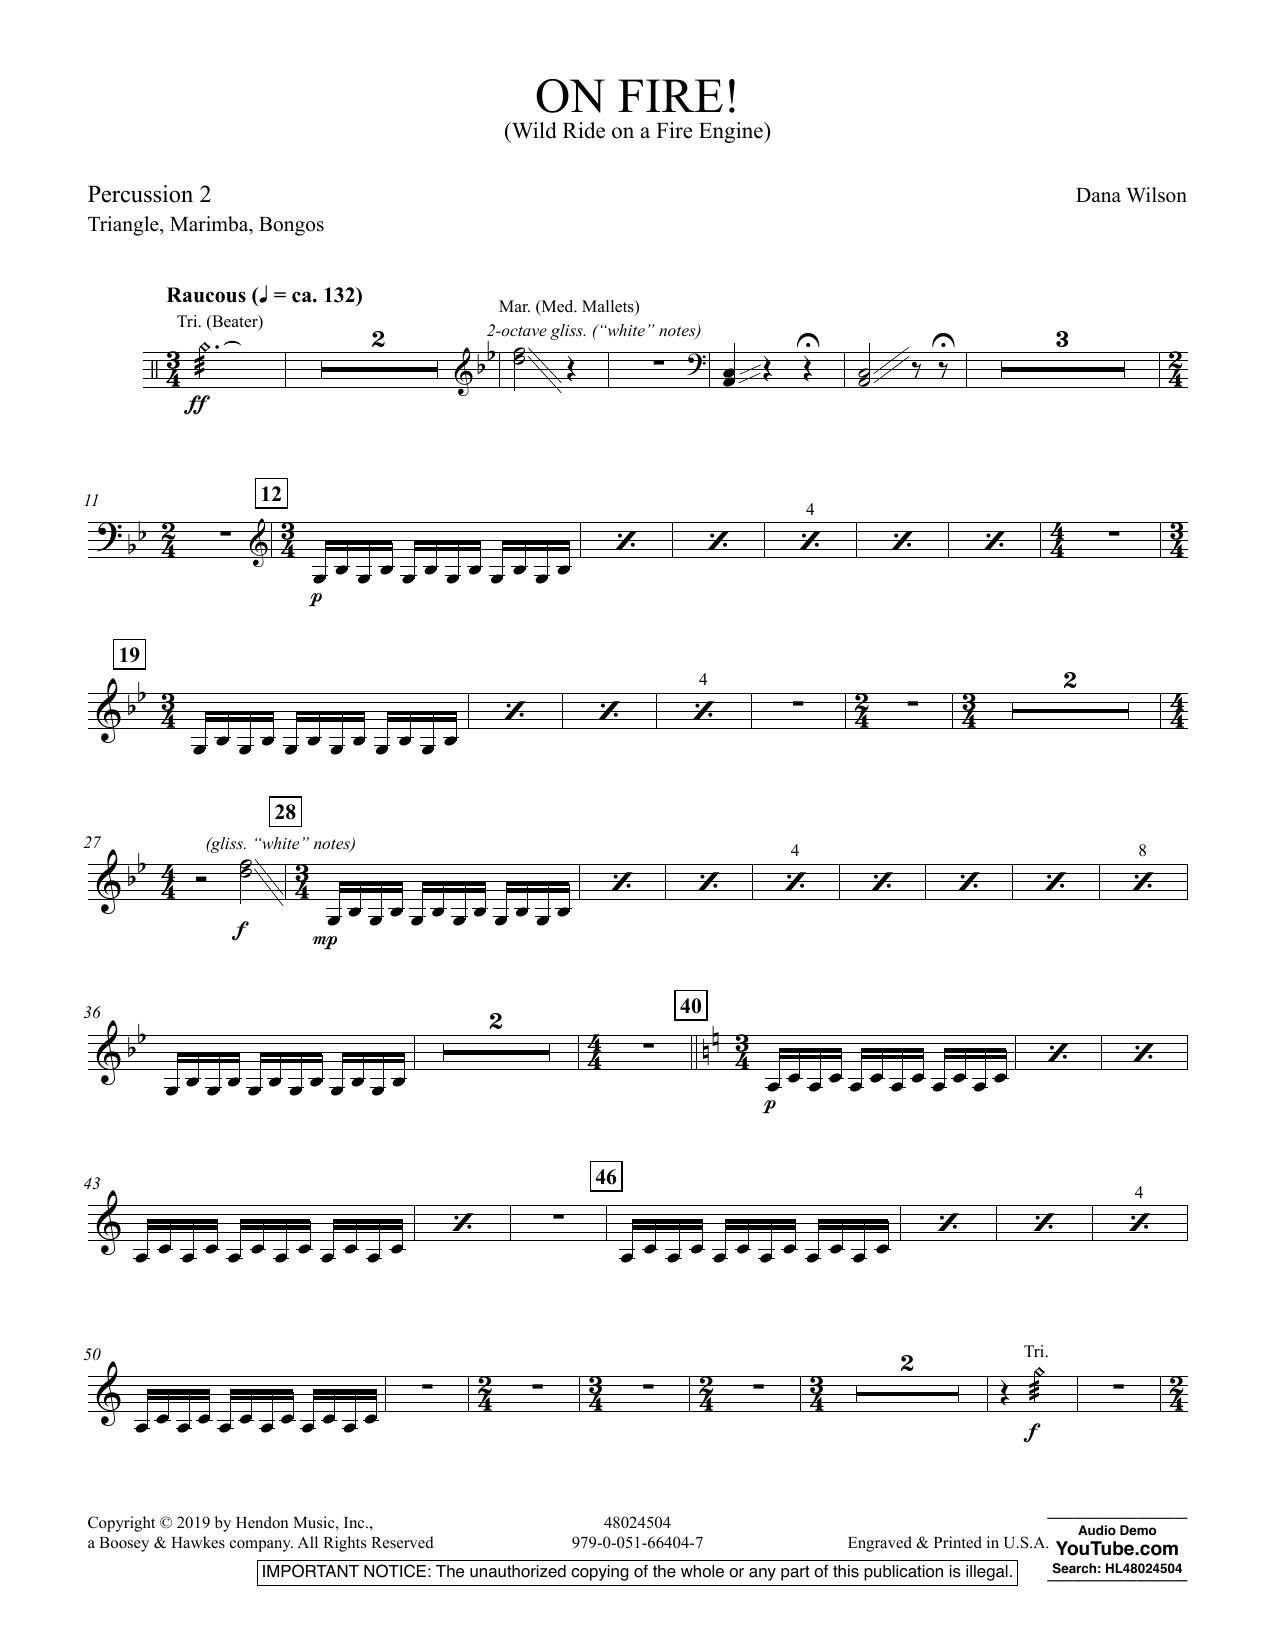 Dana Wilson On Fire! (Wild Ride on a Fire Engine) - Percussion 2 sheet music preview music notes and score for Concert Band including 2 page(s)